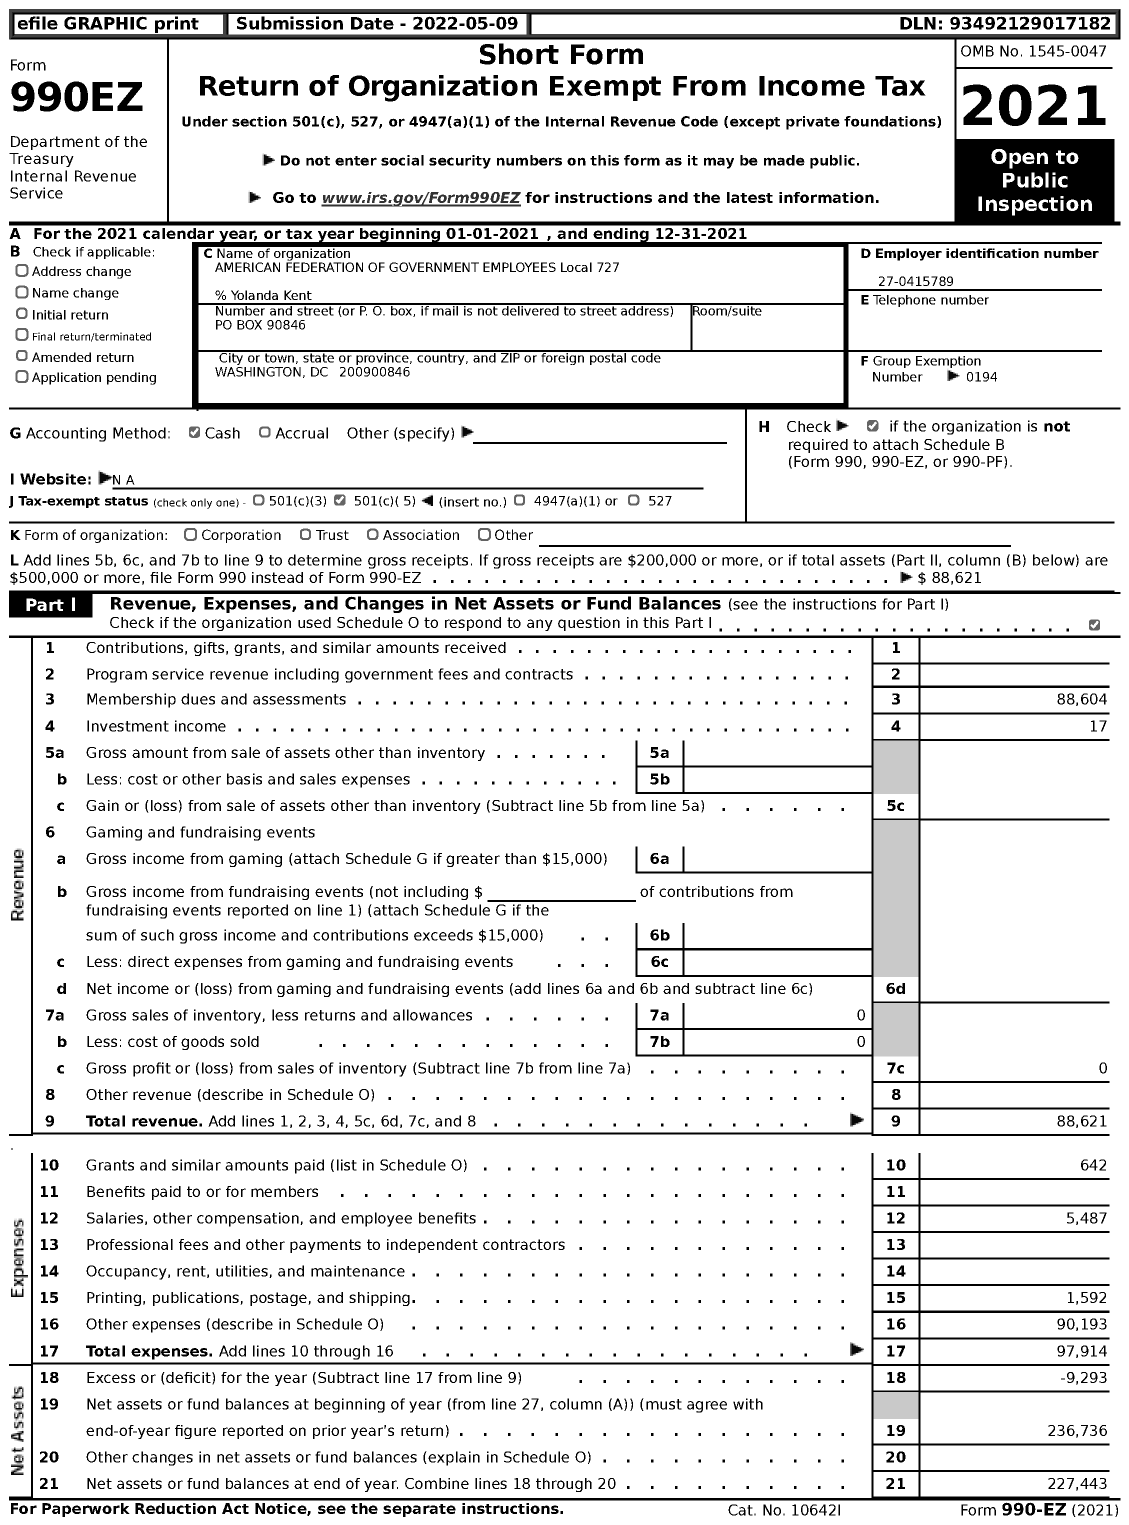 Image of first page of 2021 Form 990EZ for AMERICAN FEDERATION OF GOVERNMENT EMPLOYEES - 0727 Afge Local